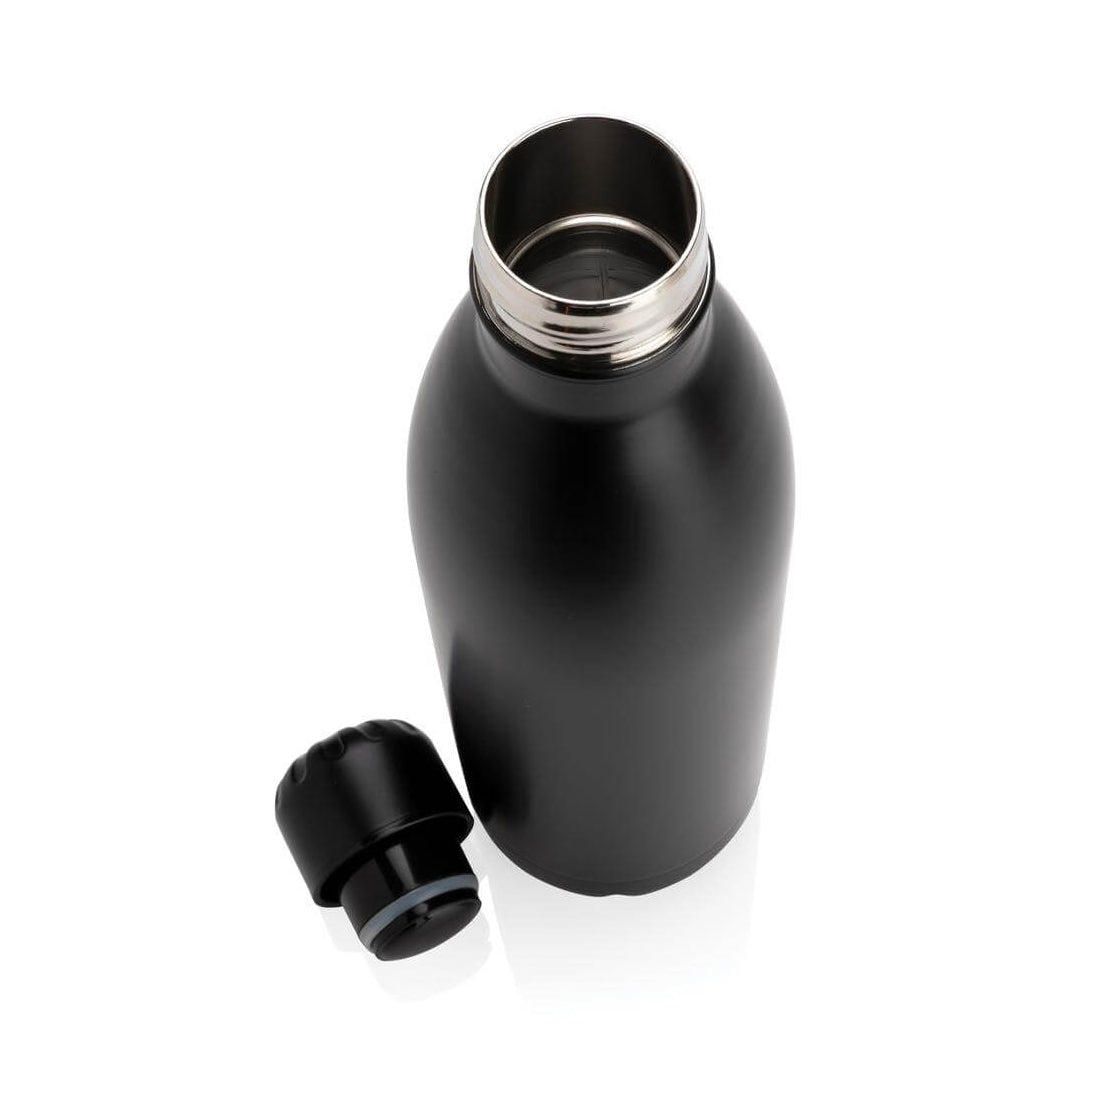 Soft Touch Insulated Water Bottle - Black